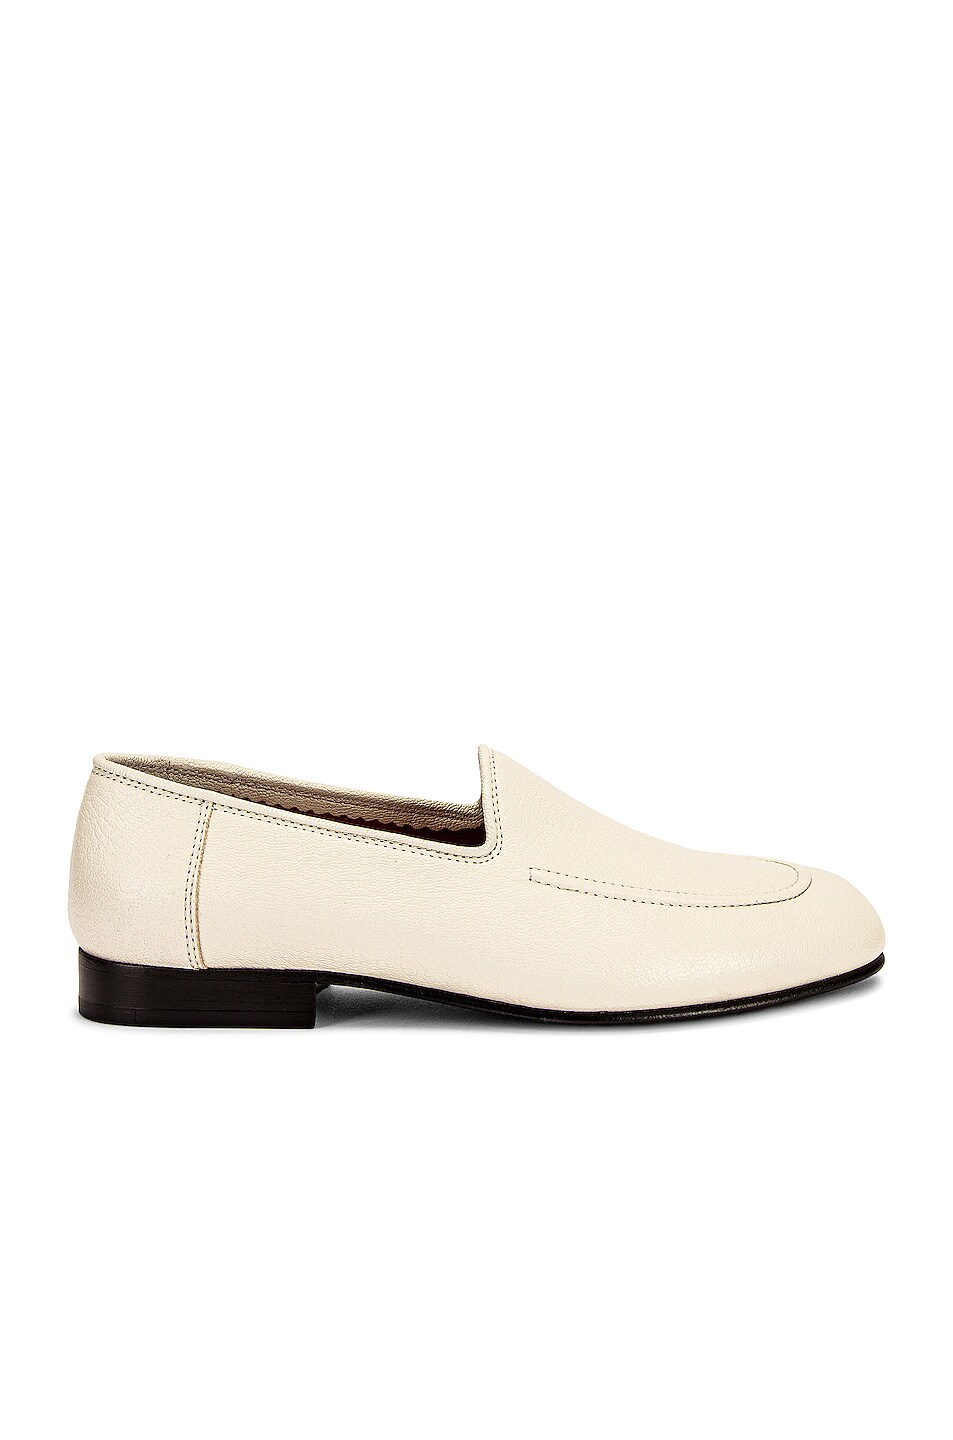 Image 1 of The Row Mocassin Loafers in Milk